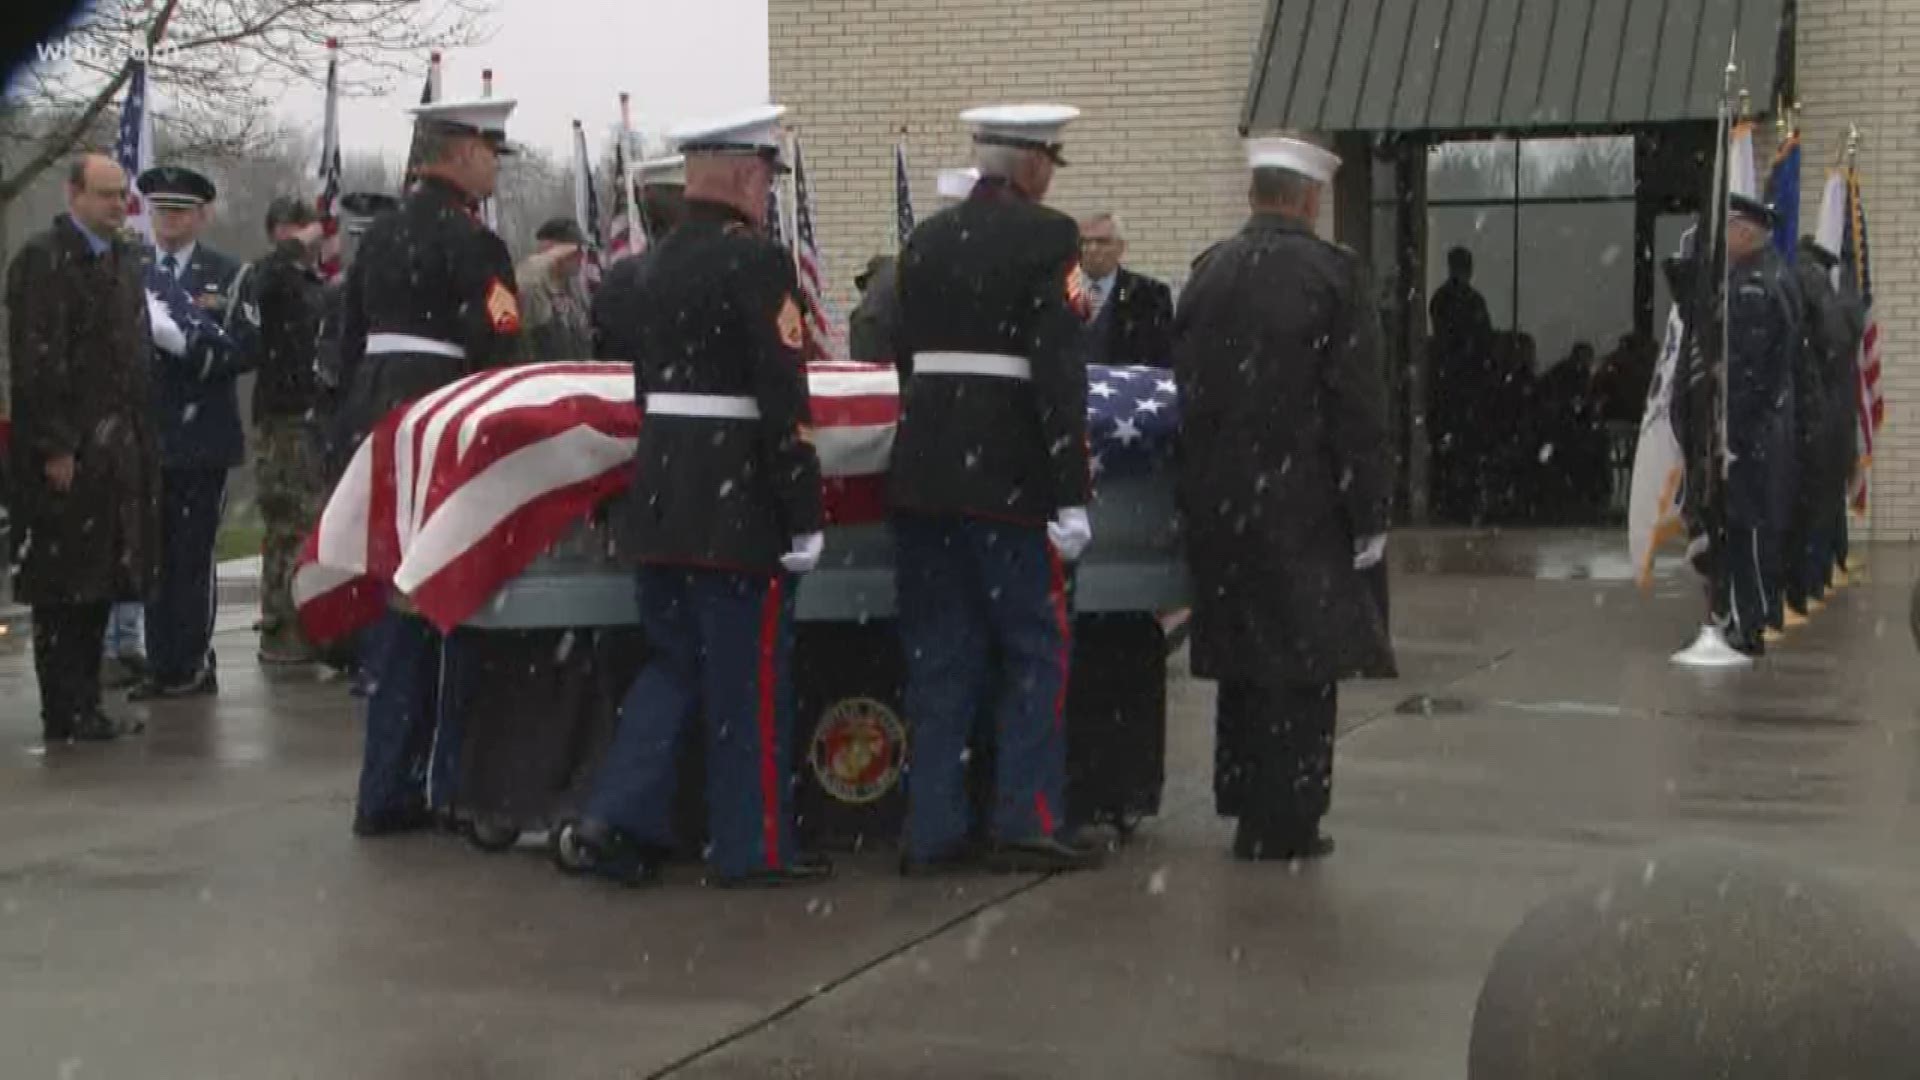 Dozens of veterans gather in the falling snow to honor two unclaimed veterans who were laid to rest today.